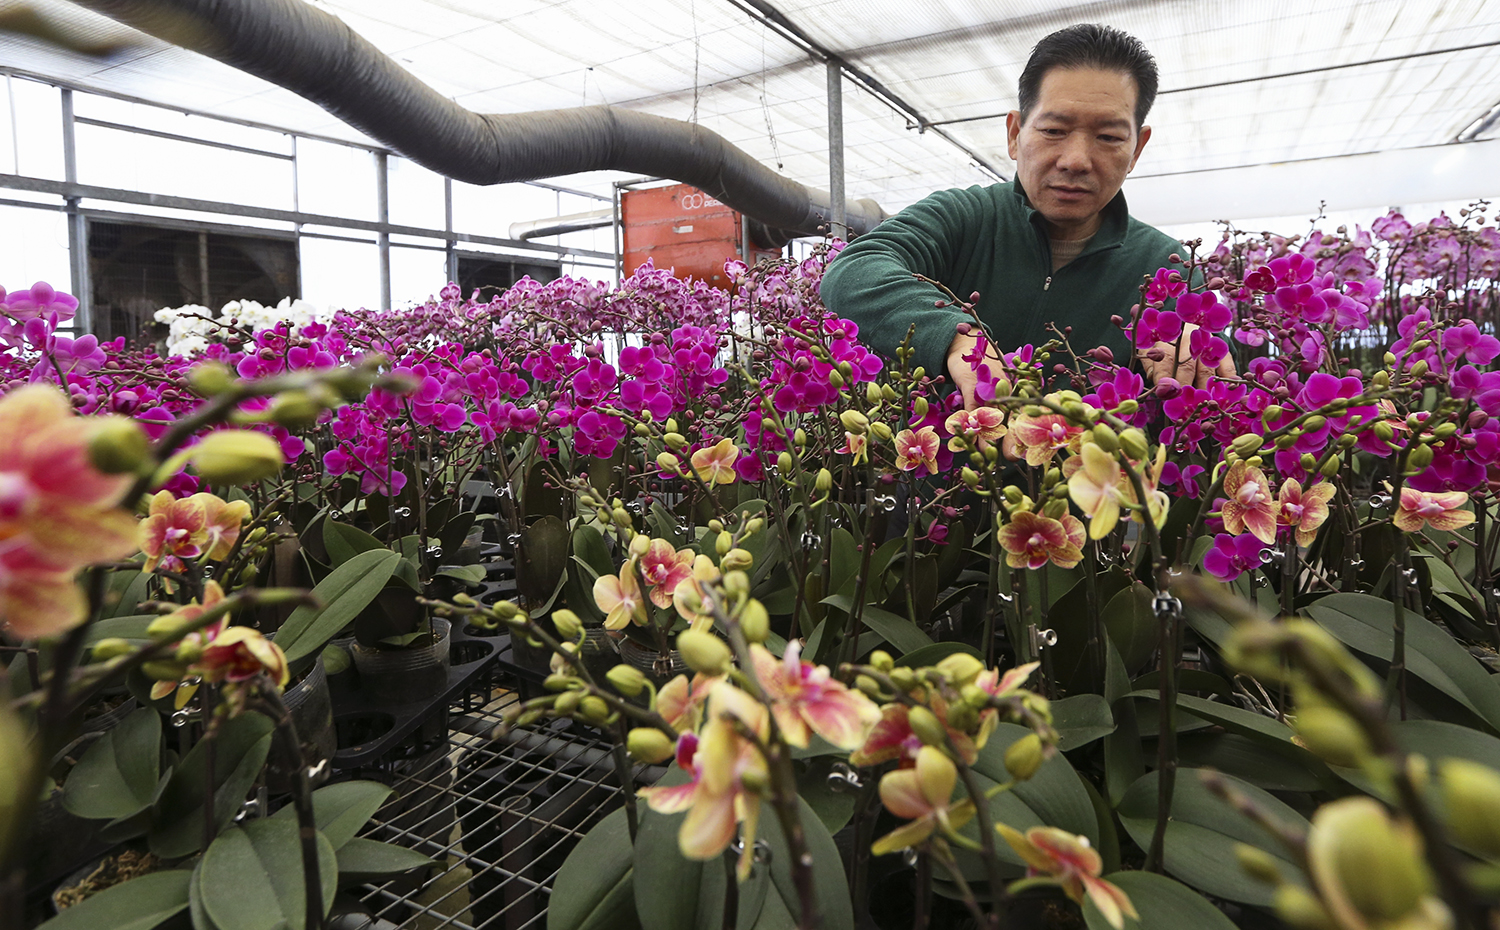 Yeung Siu-lung looks tends to flowers in one of 10 greenhouses at his Chiba Garden in Yuen Long. Photo: Felix Wong